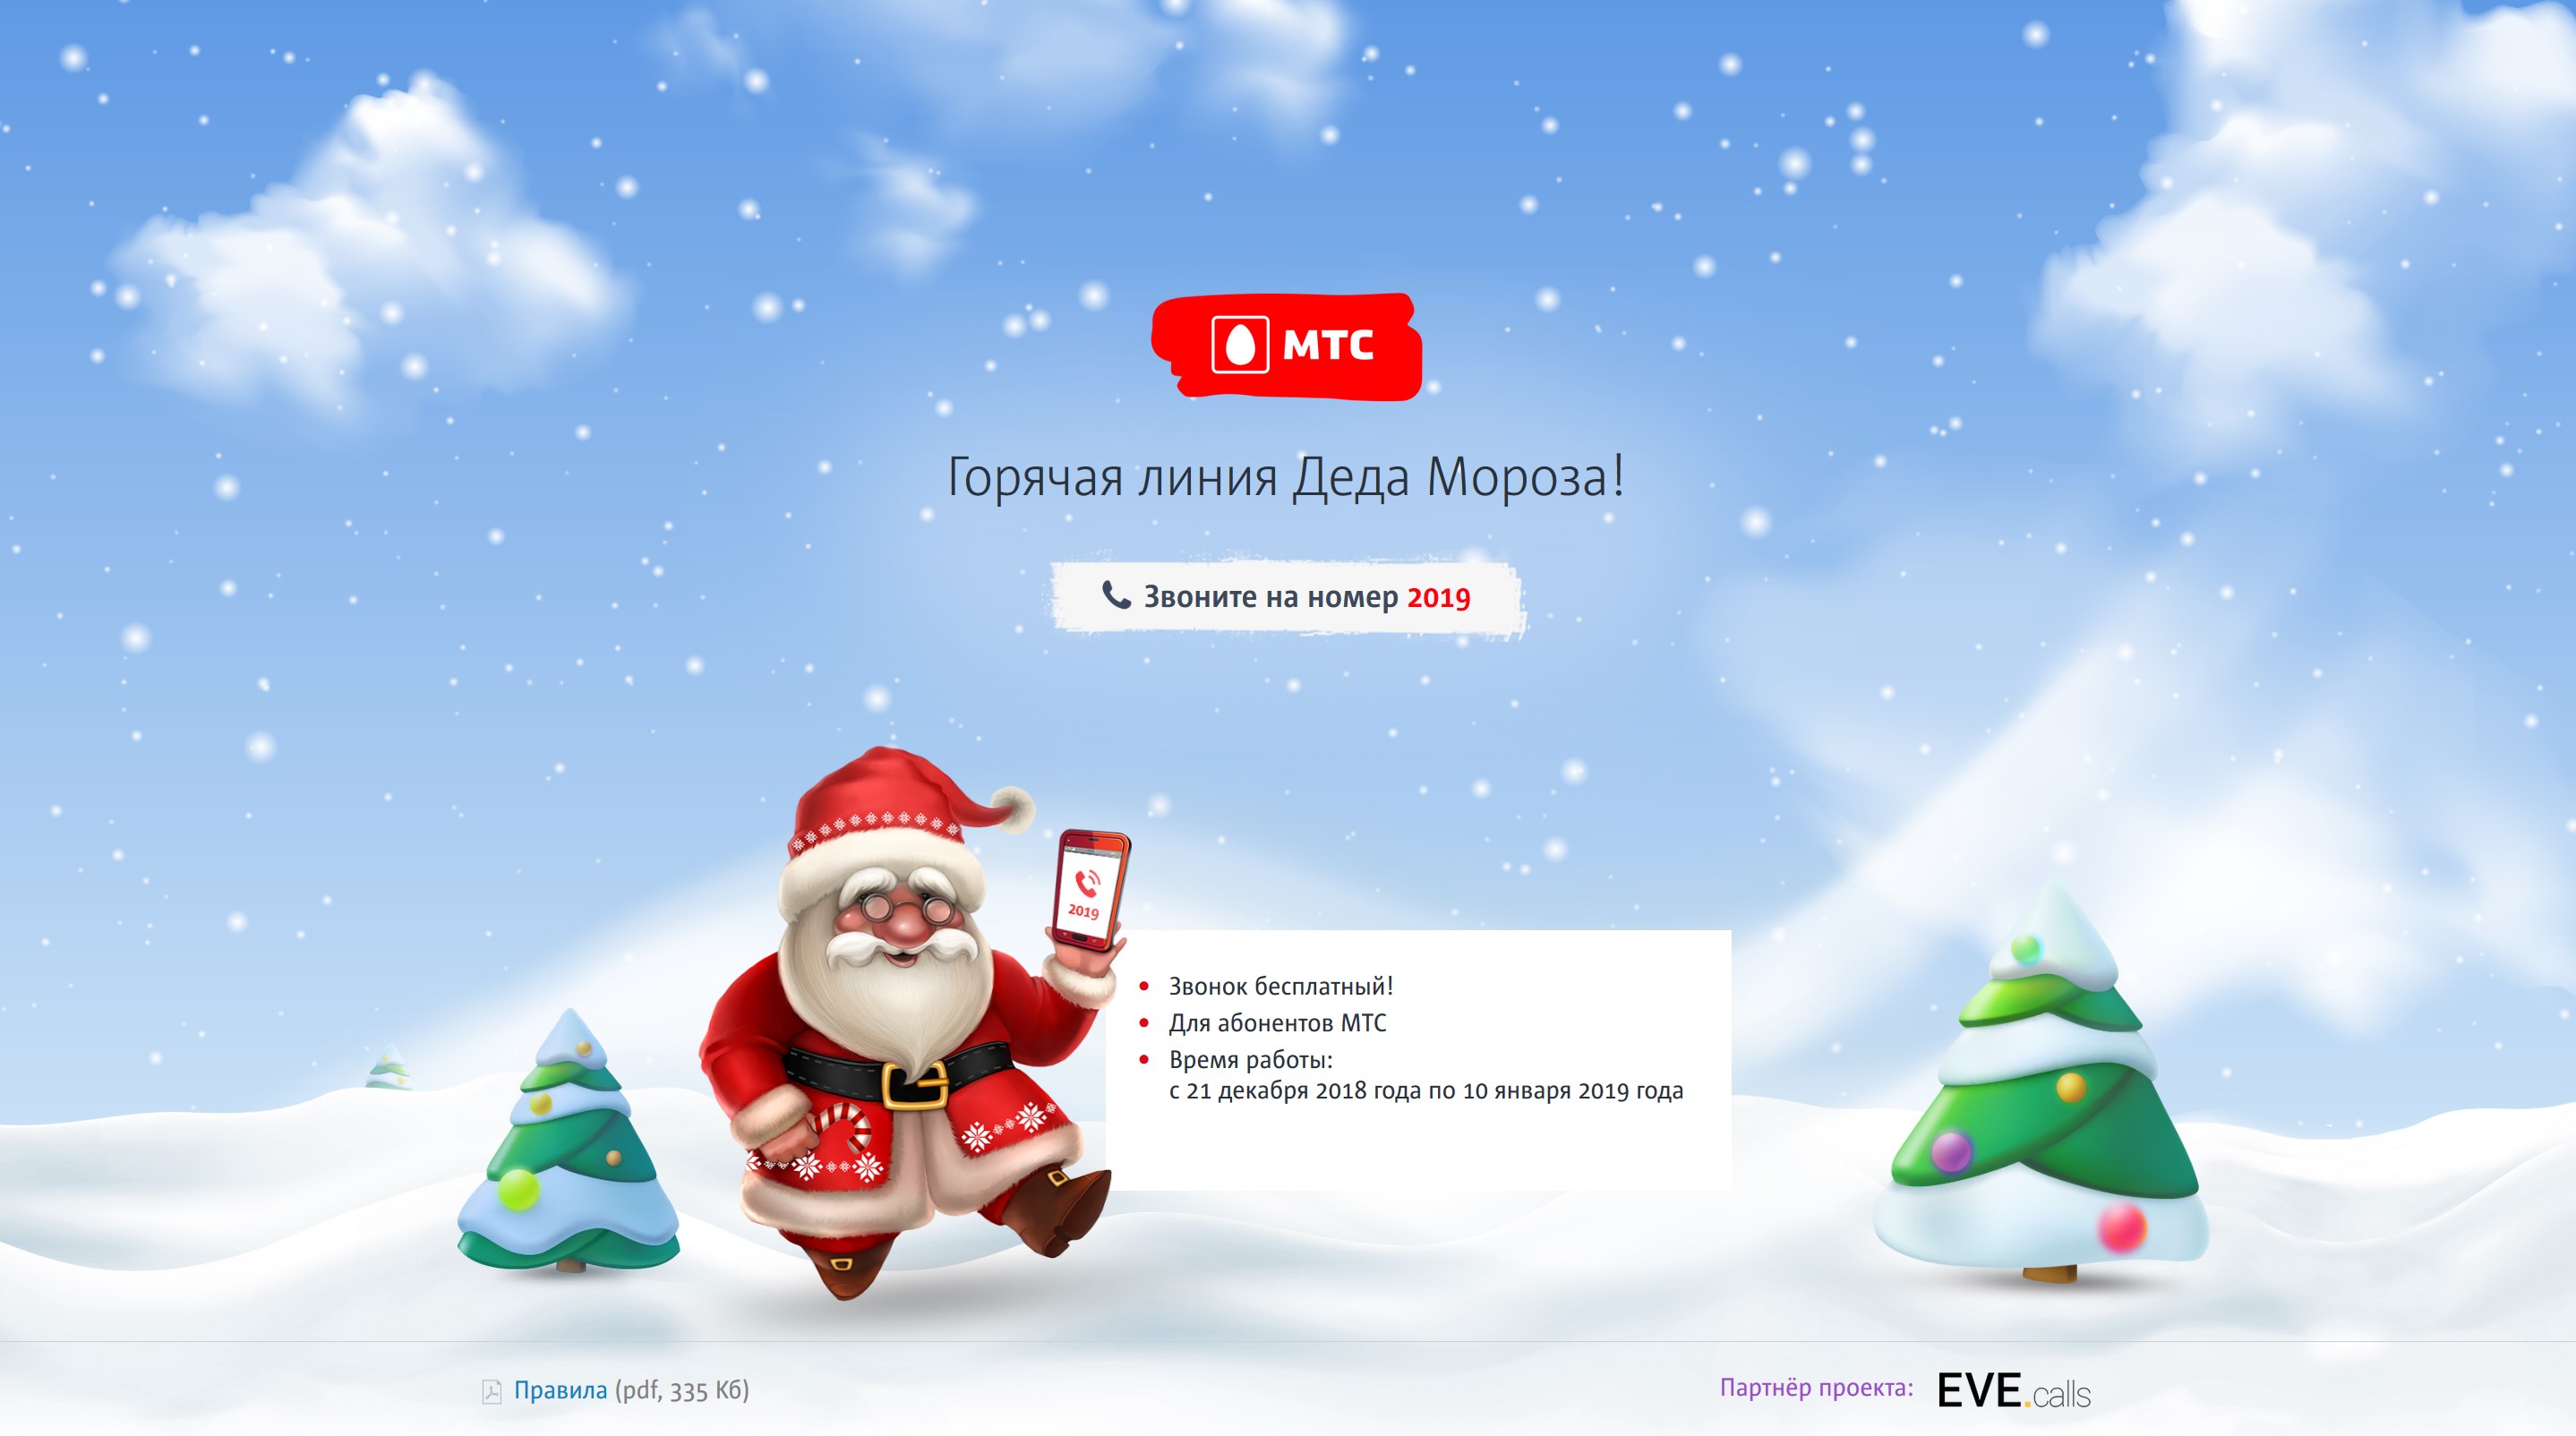 Eva together with MTS Belarus successfully held the New Year's Campaign "Call Santa Claus 2019"